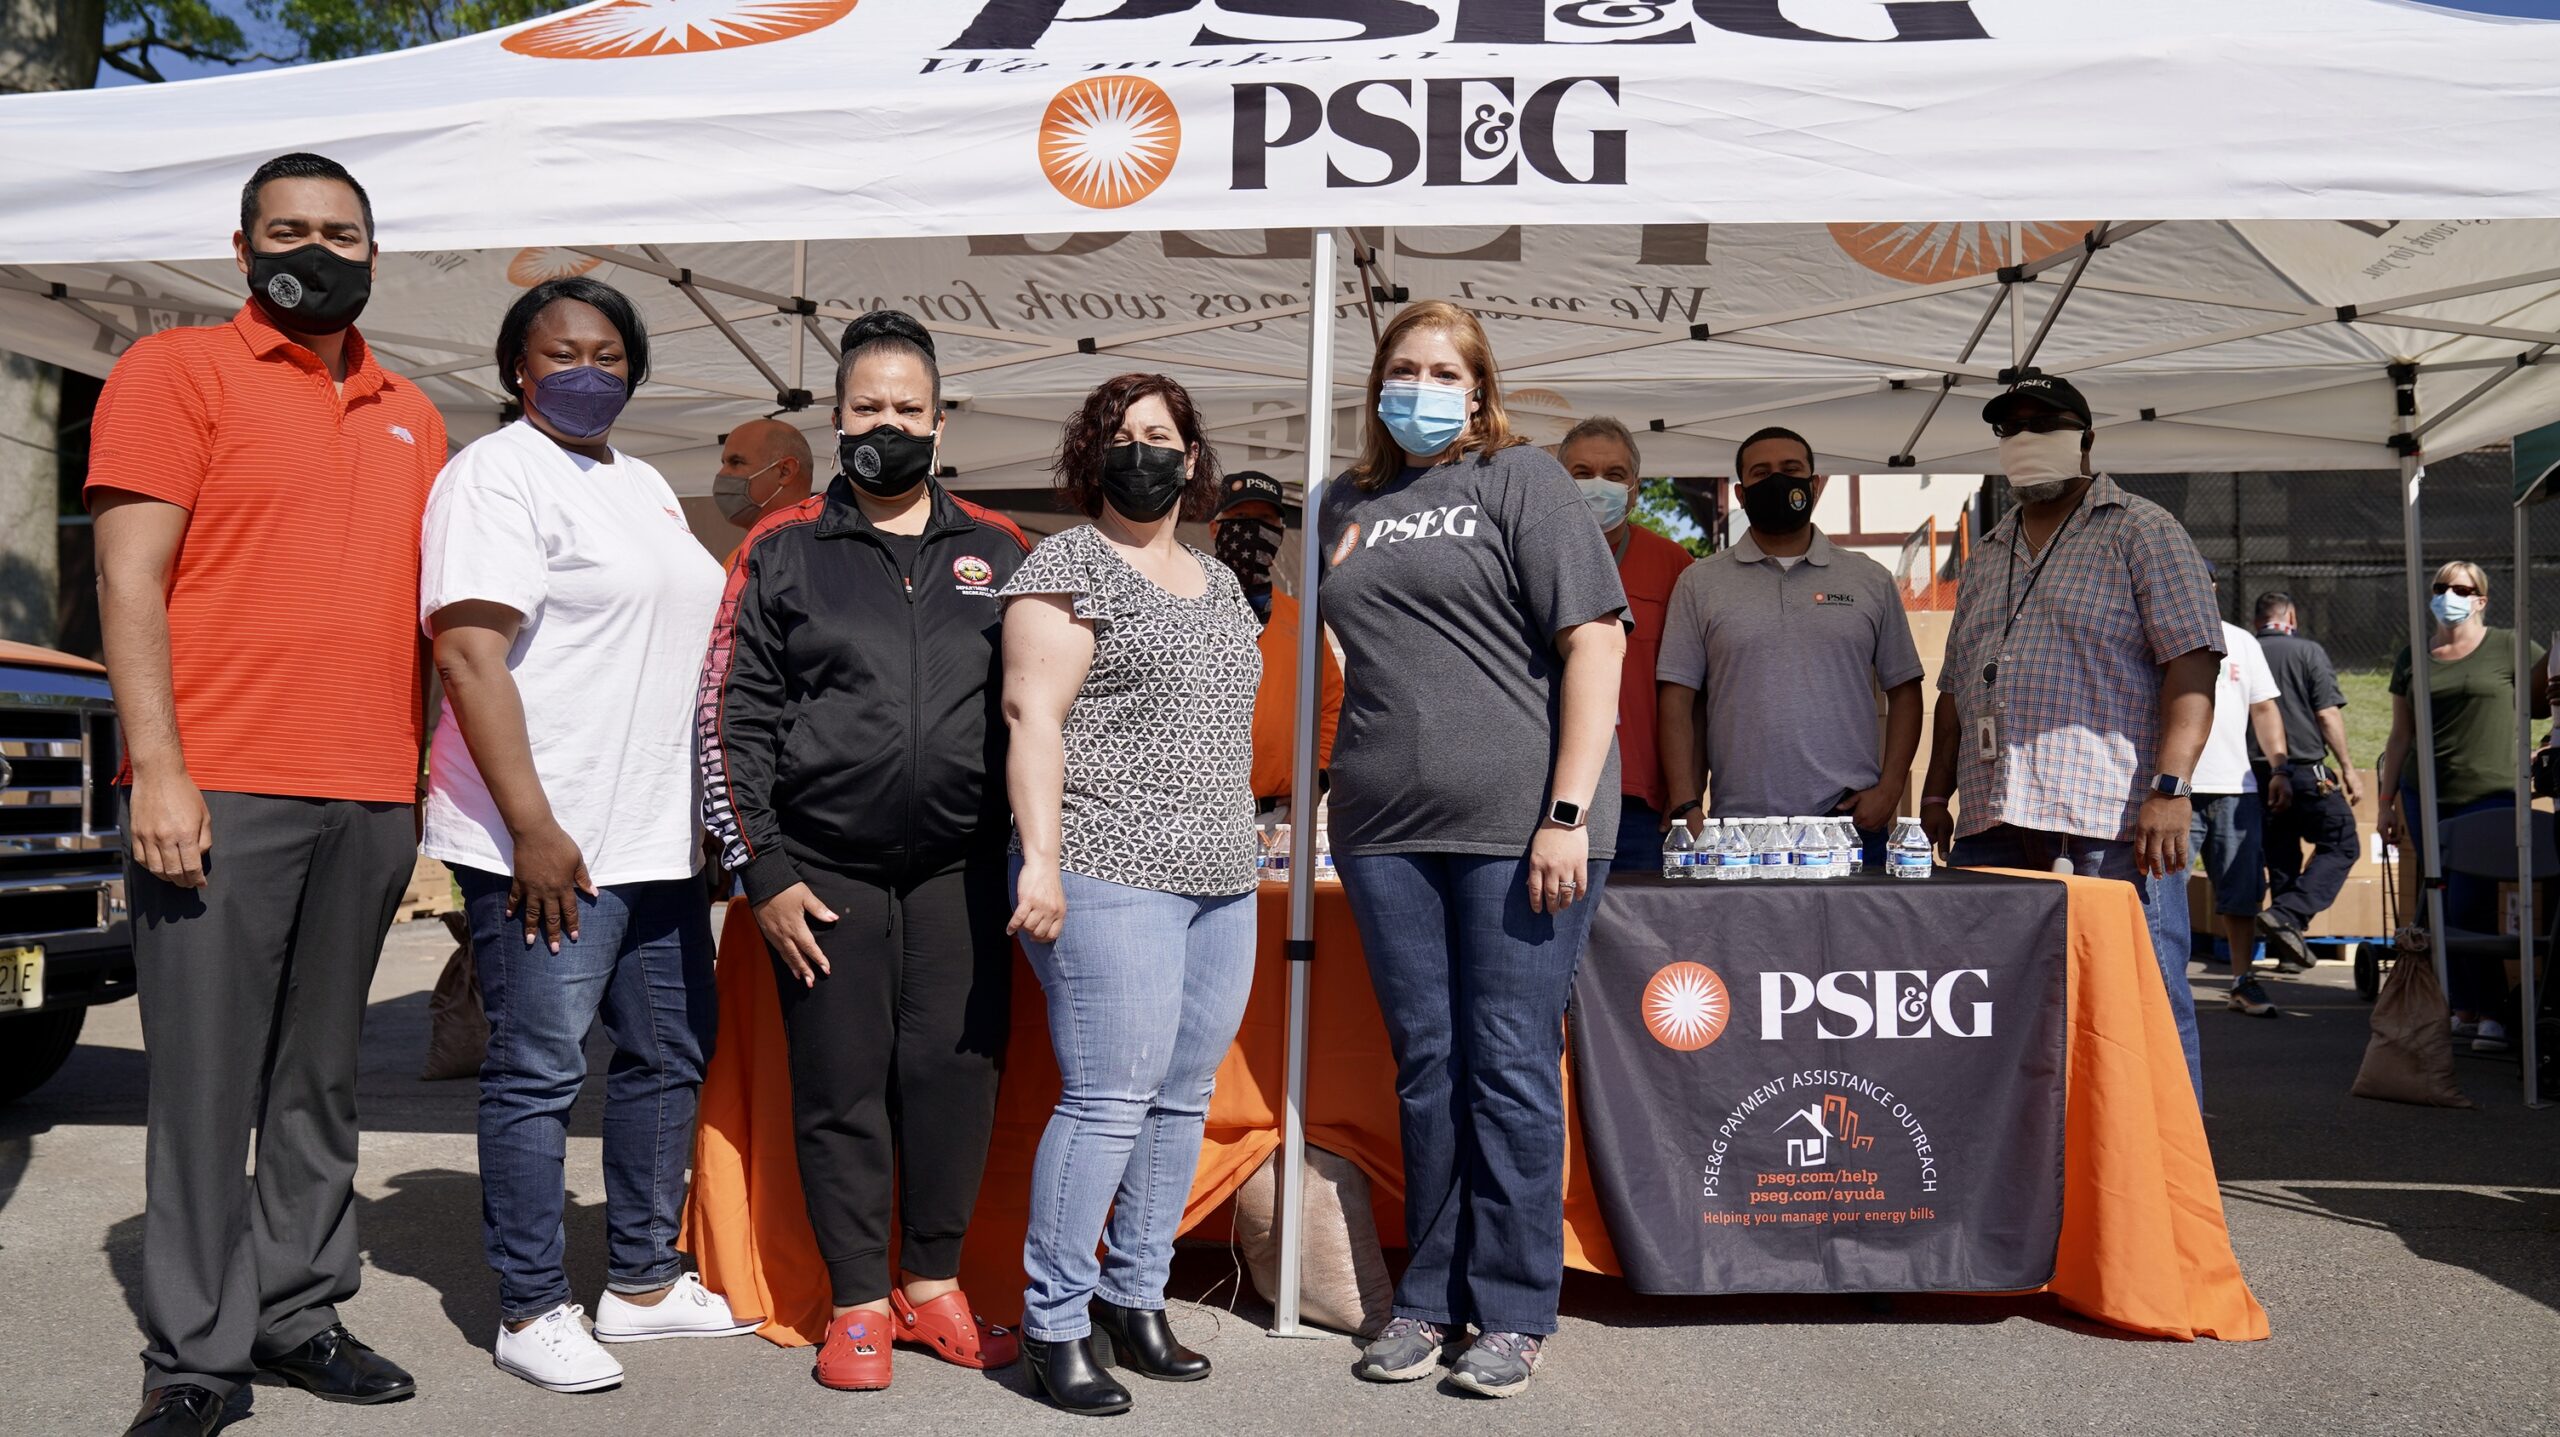 people standing in front of pse&g pop up tent and table for a photo